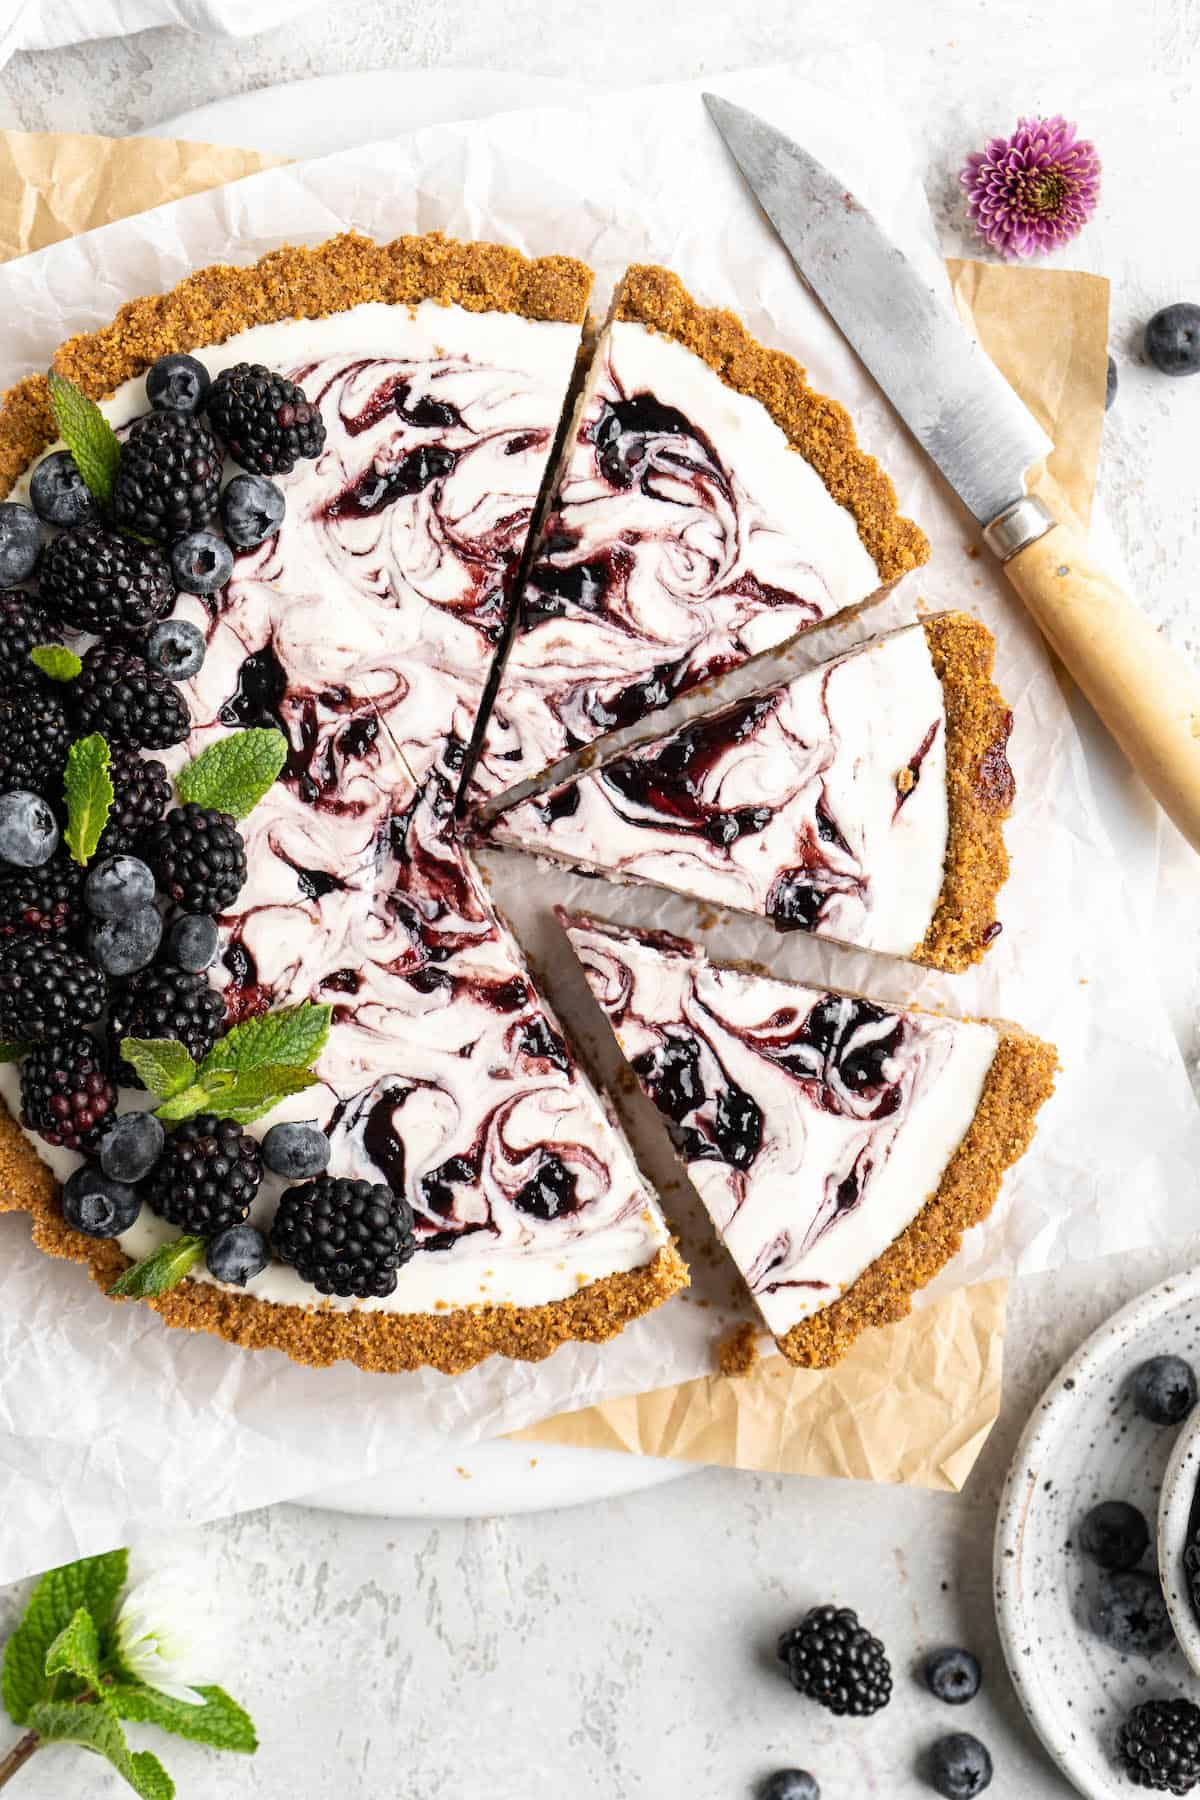 A close up of a blackberry lemonade pie with slices cut and ready to serve